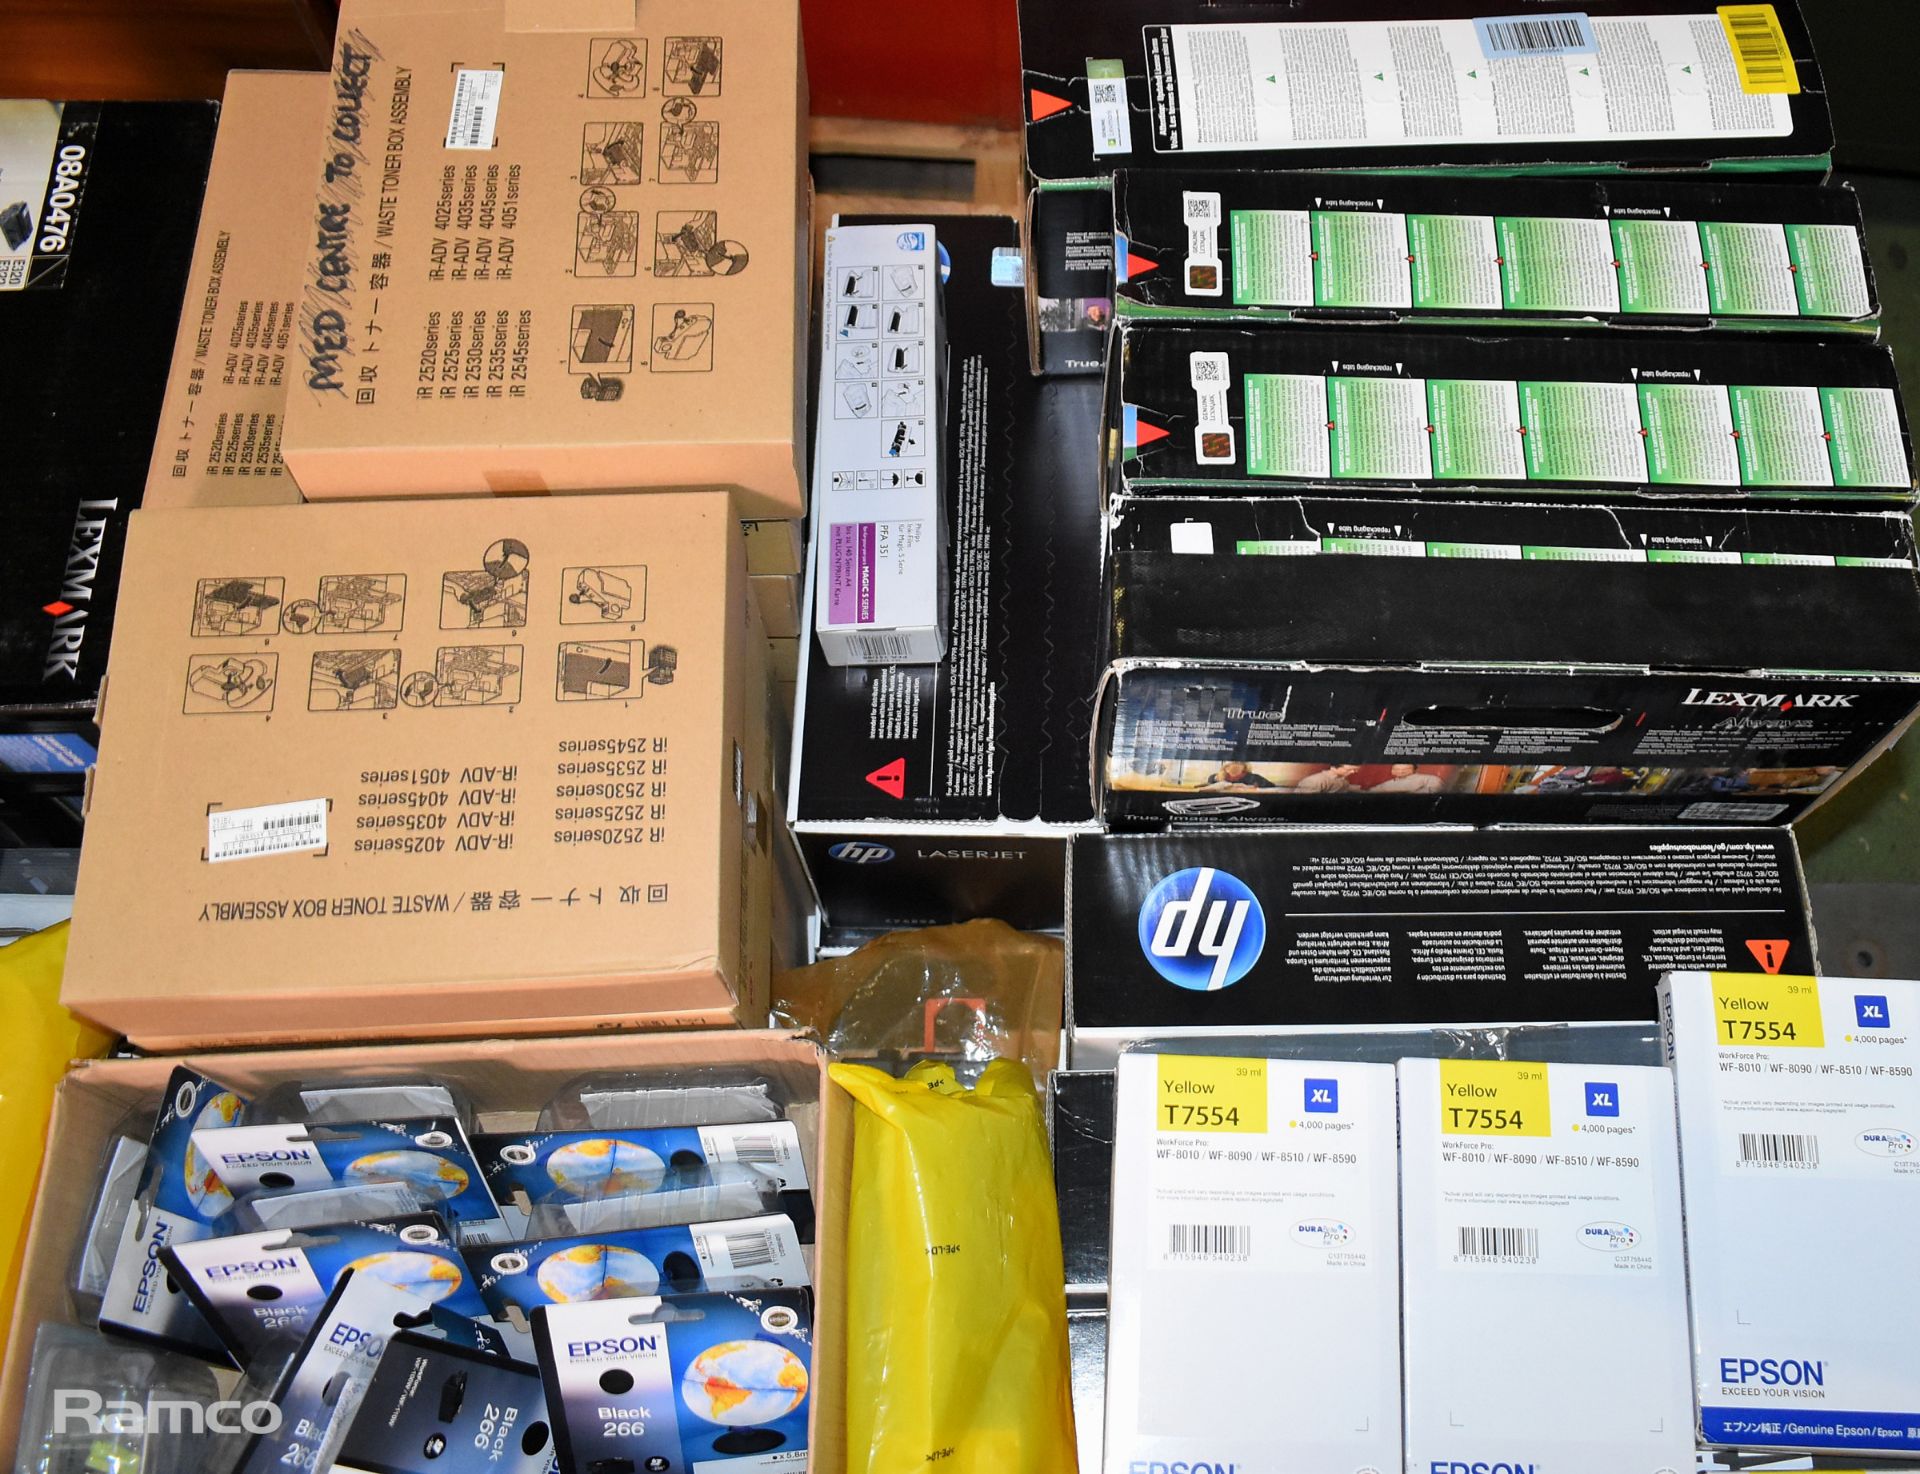 Printer toner cartridges - HP. Canon and Lexmark - see description for details - Image 5 of 8